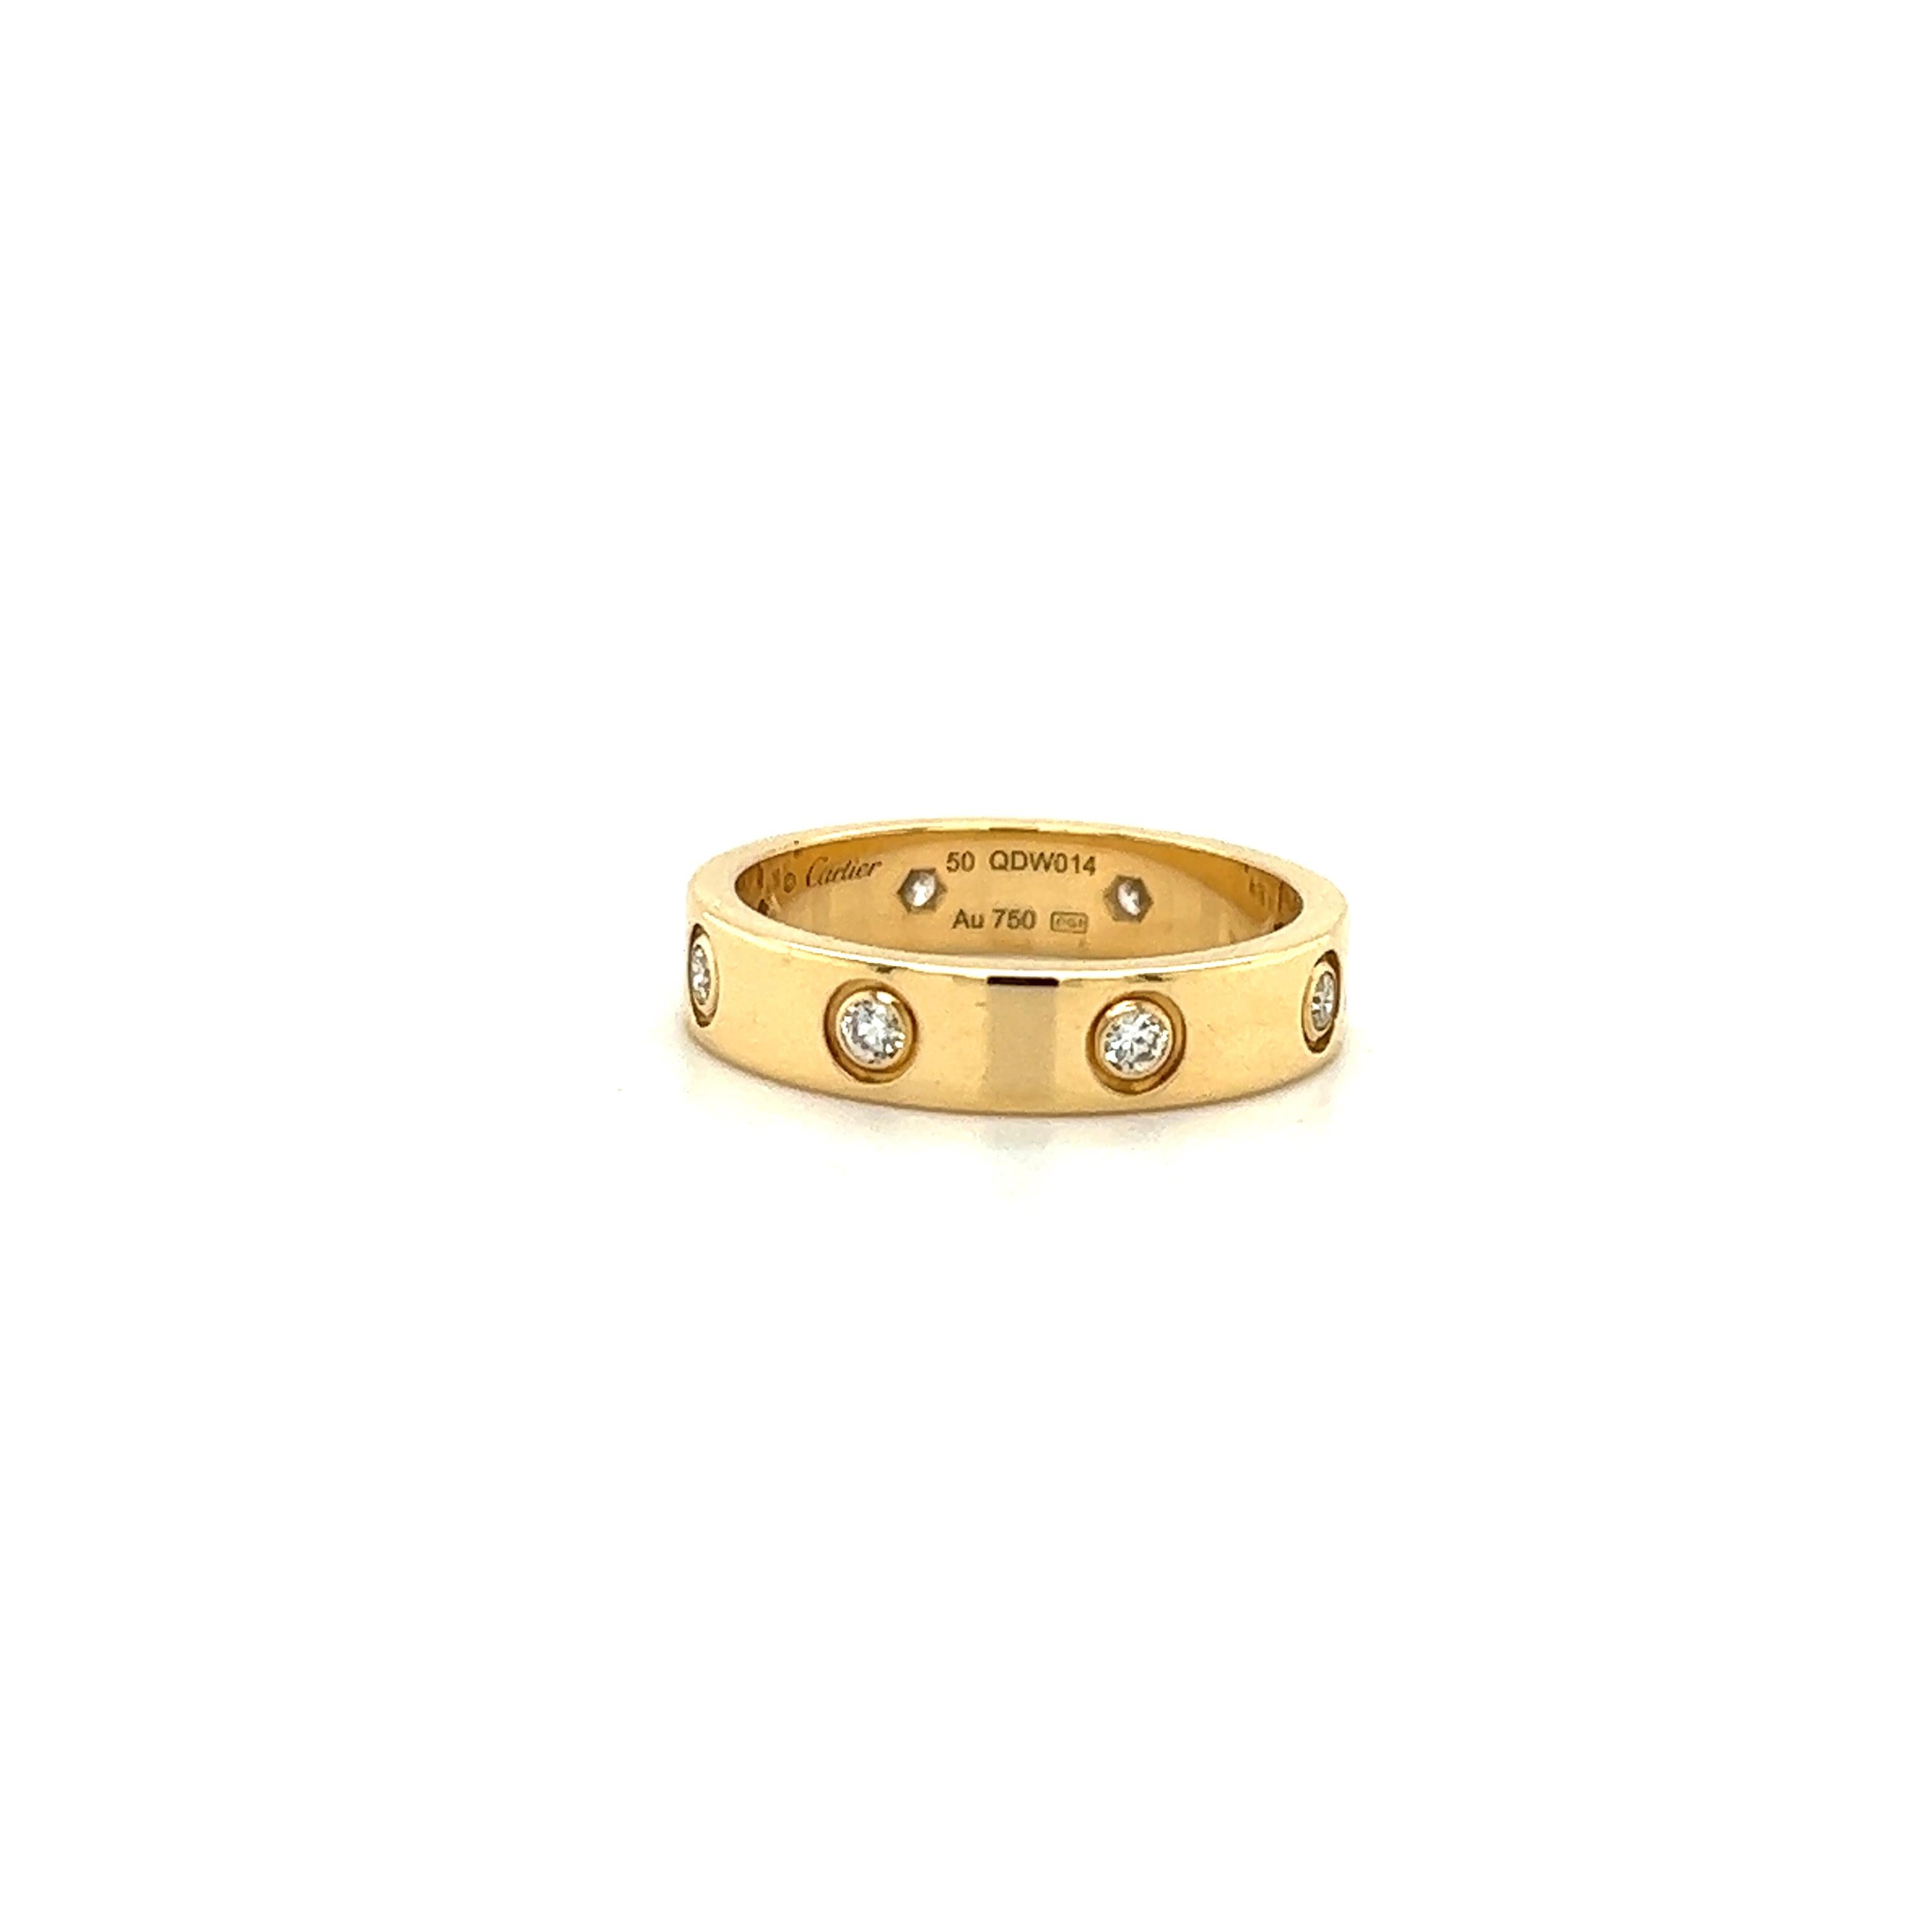 Beautiful ring by famed designer Cartier. From the love collection this iconic design is crafted in 18k yellow gold. The ring is set with 8 diamonds giving the design a total carat weight of 0.19 ct. The diamonds are white in color and show Vvs